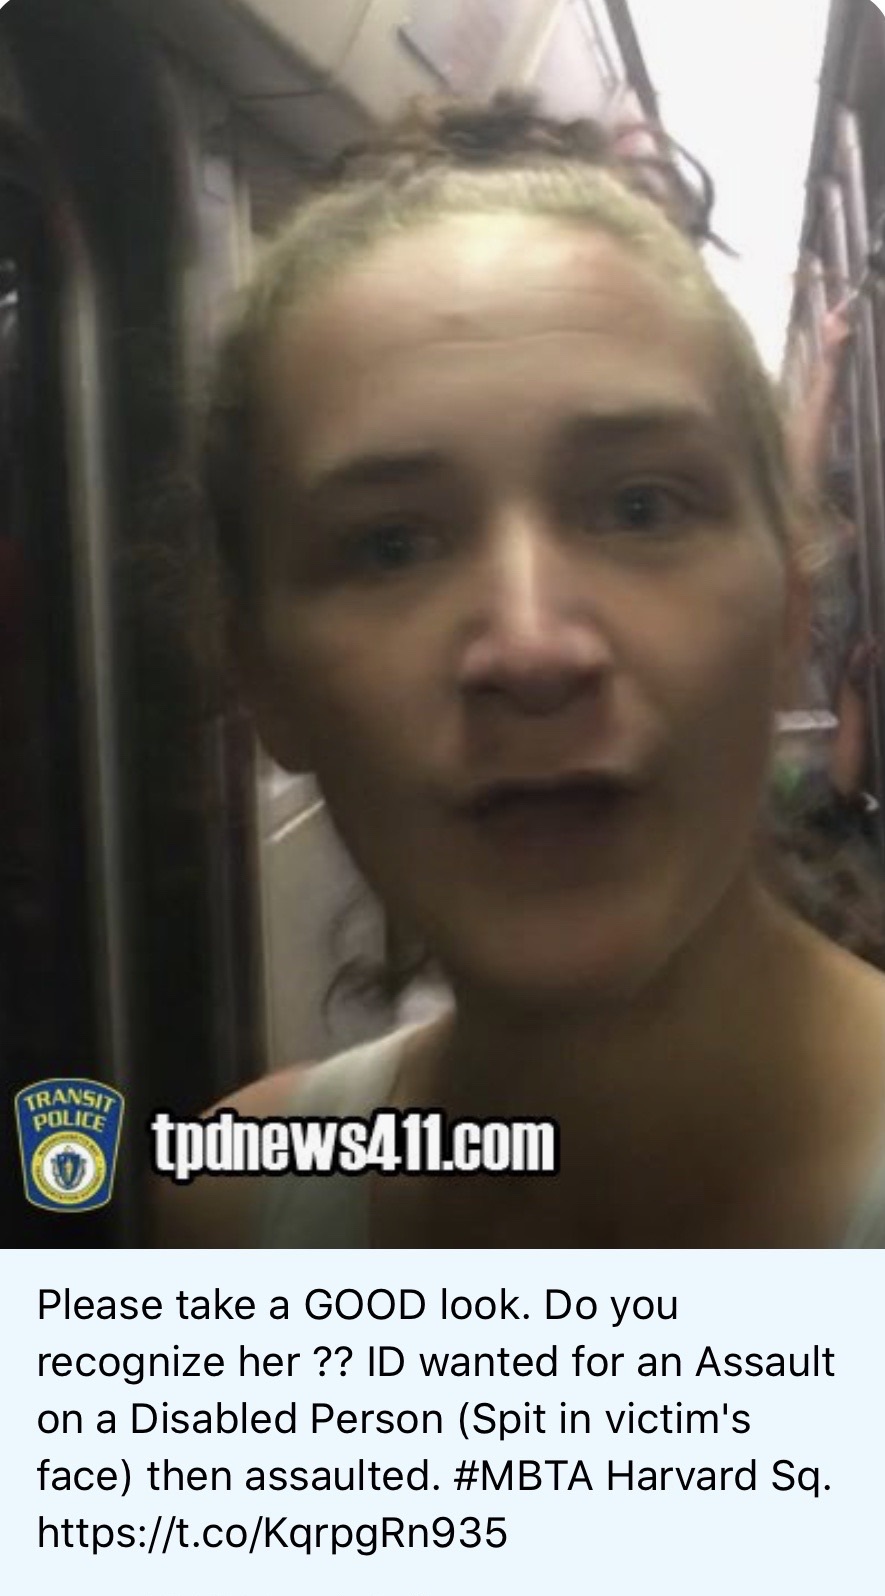 photo caption - Transa Police tpdnews411.com Please take a Good look. Do you recognize her ?? Id wanted for an Assault on a Disabled Person Spit in victim's face then assaulted. Harvard Sq.